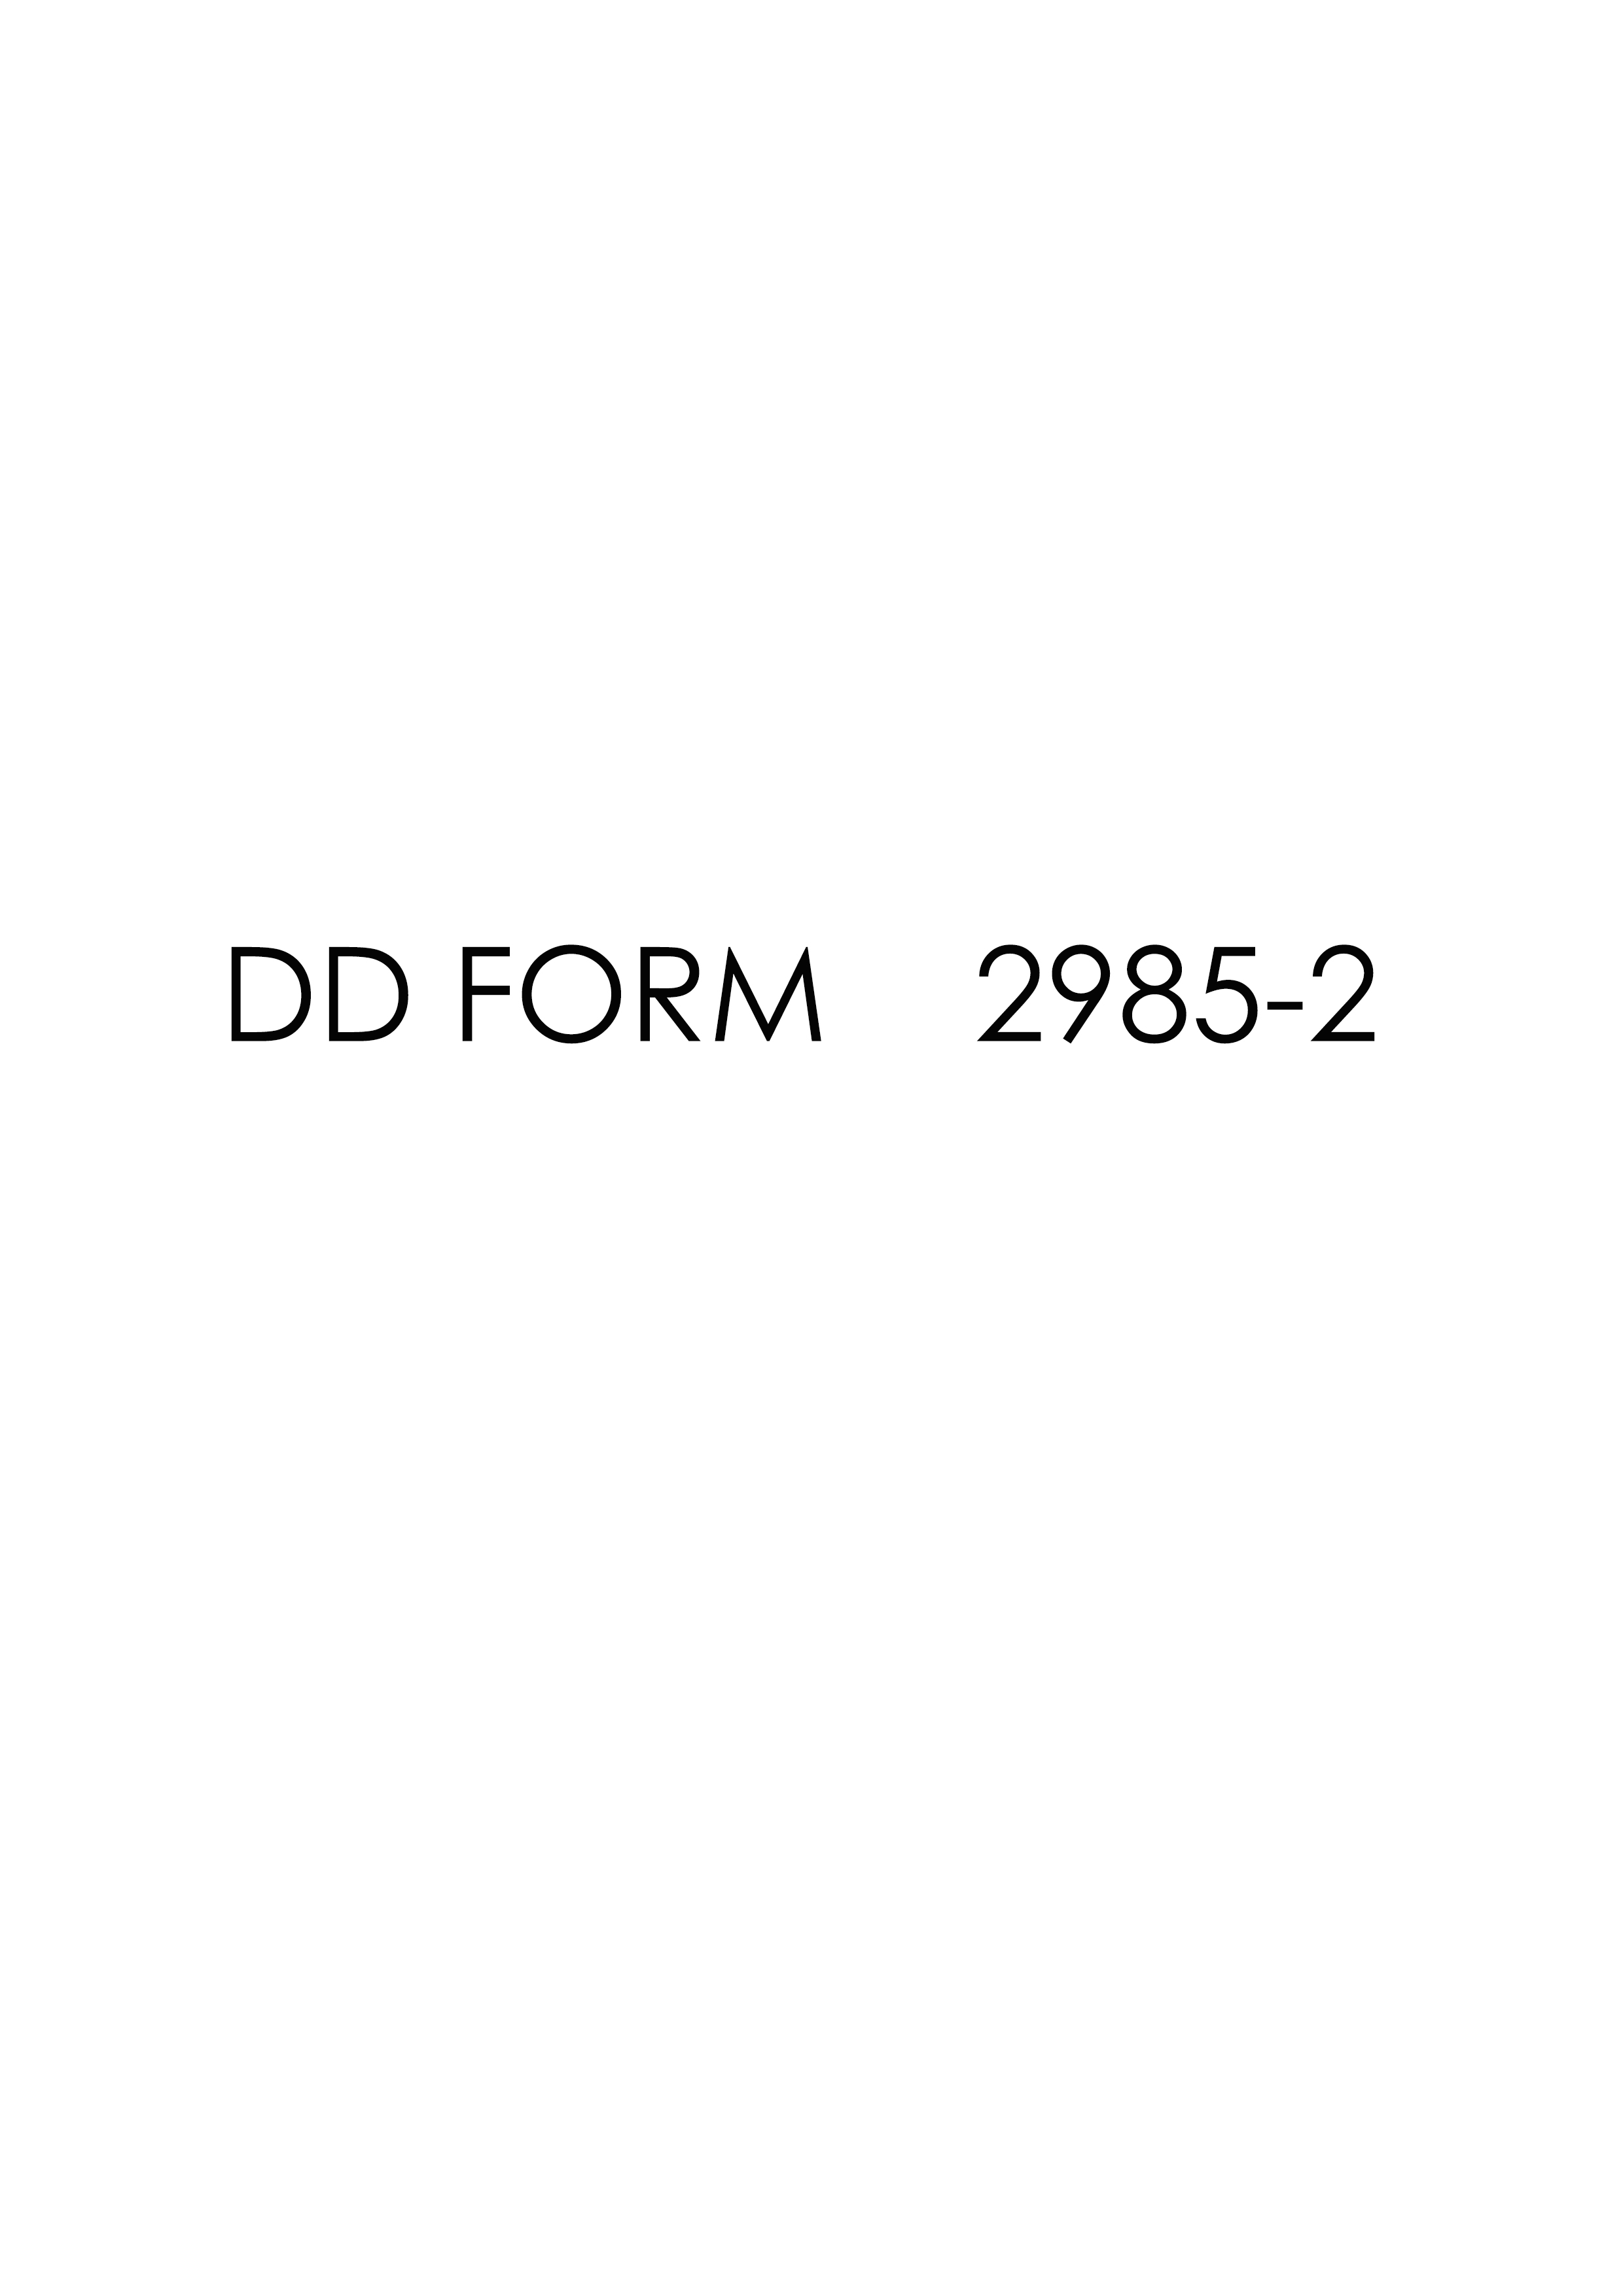 Download Fillable dd Form 2985-2